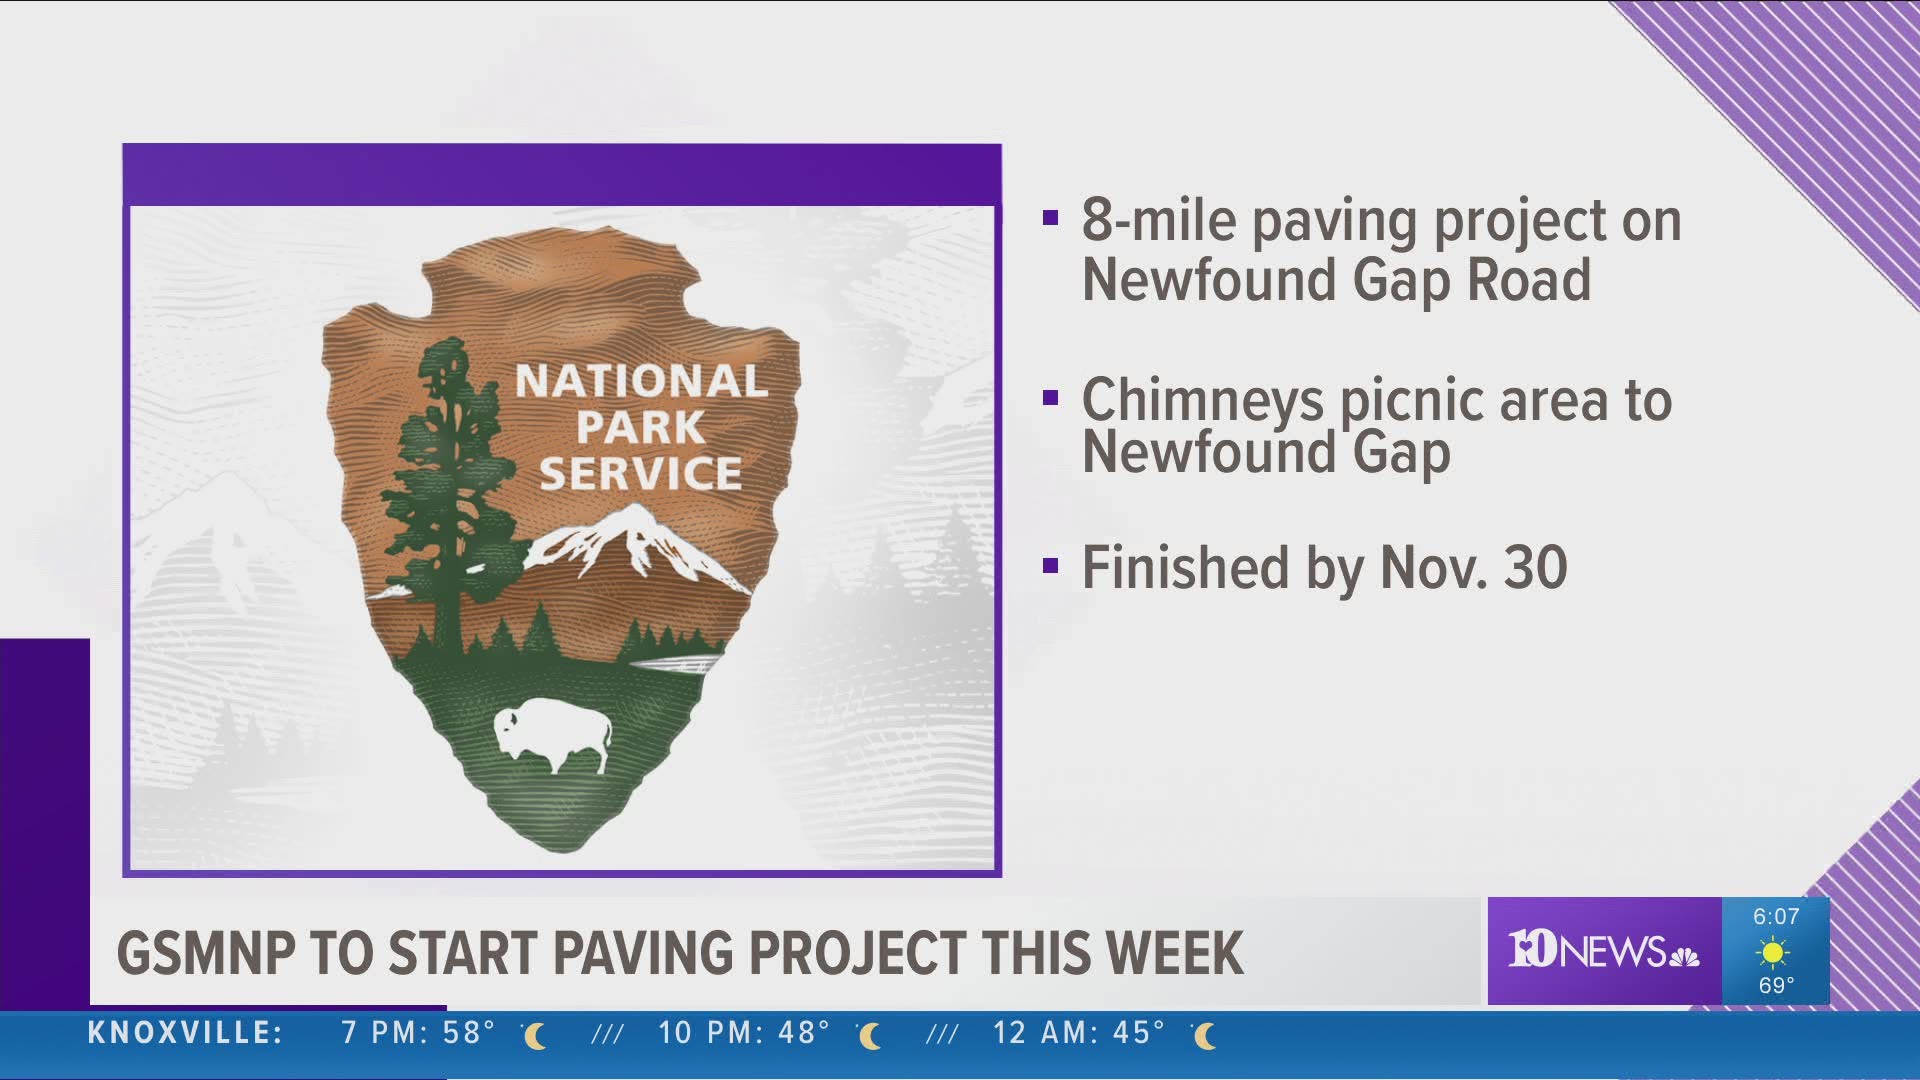 The national park also says you may run into closures on Newfound Gap Road. Paving is starting on an 8 mile section.